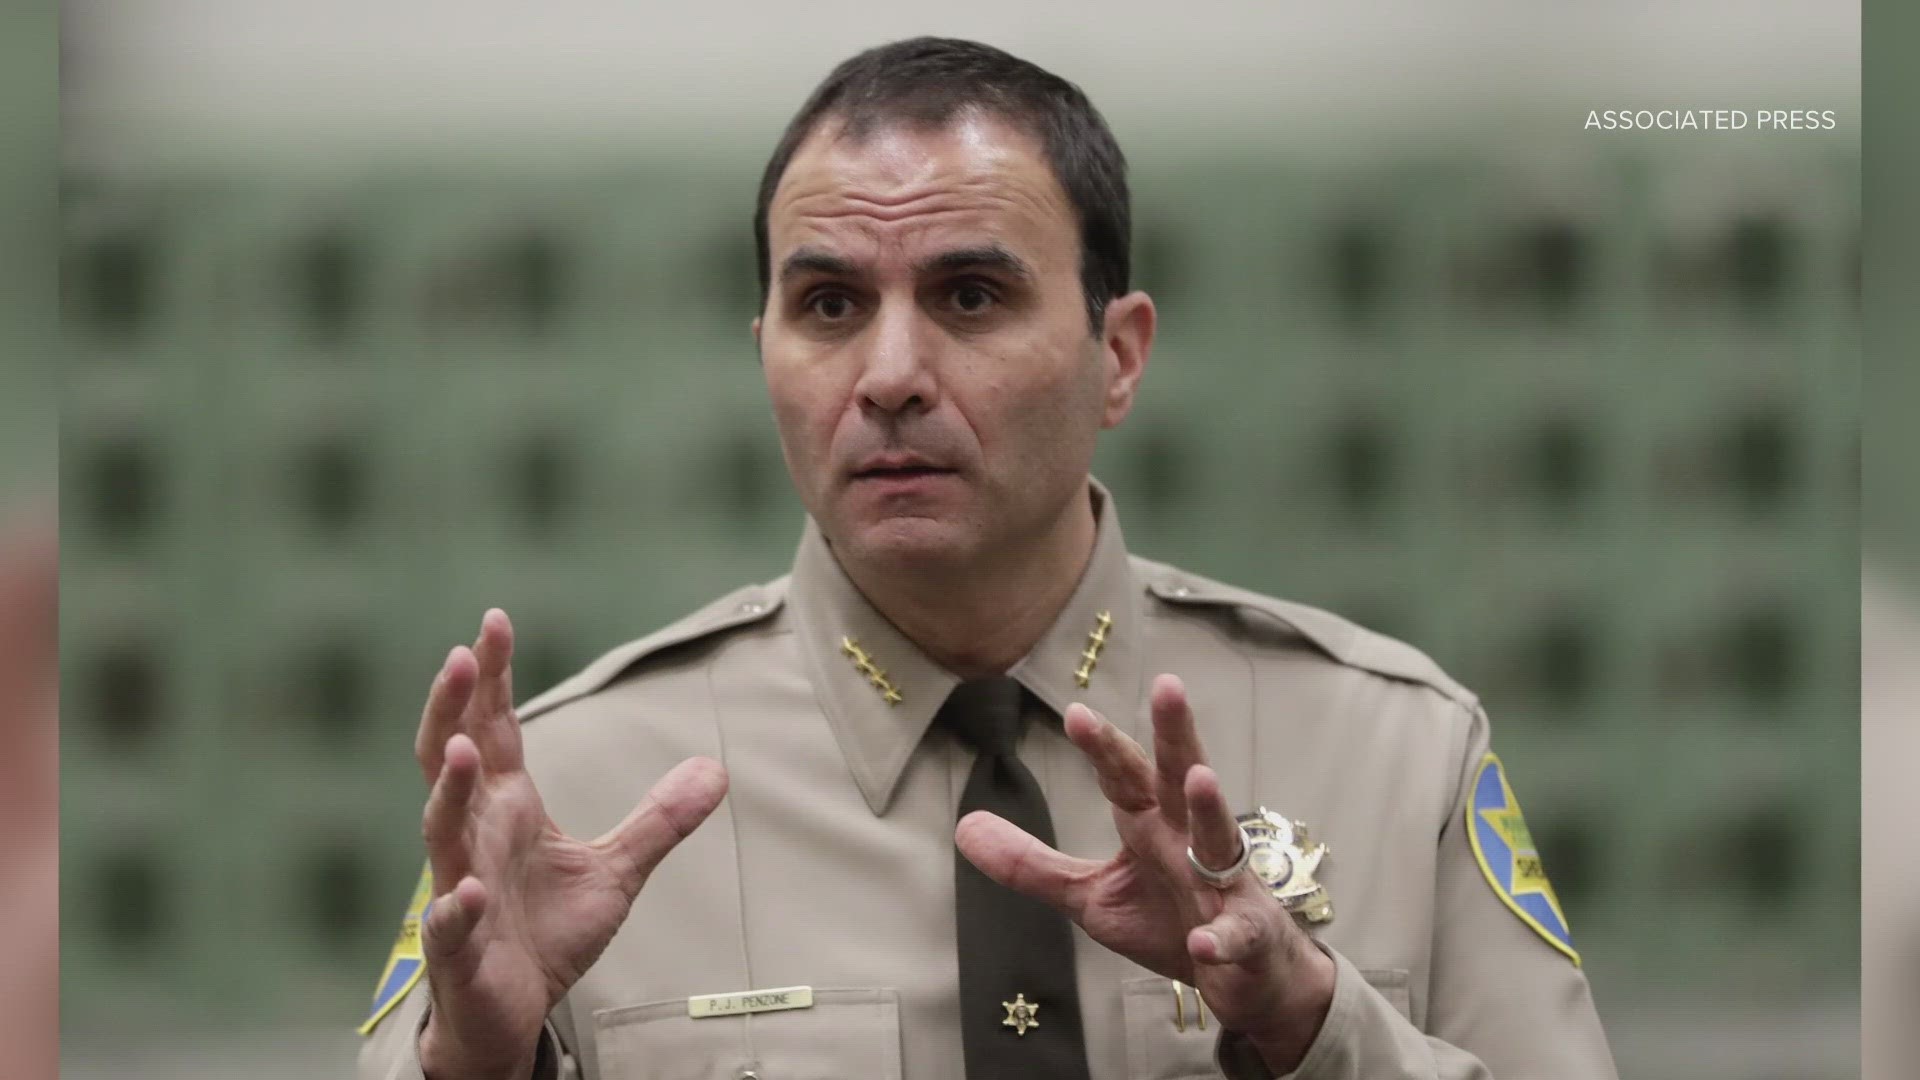 On Monday, Maricopa County Sheriff Paul Penzone announced he will not be seeking reelection.